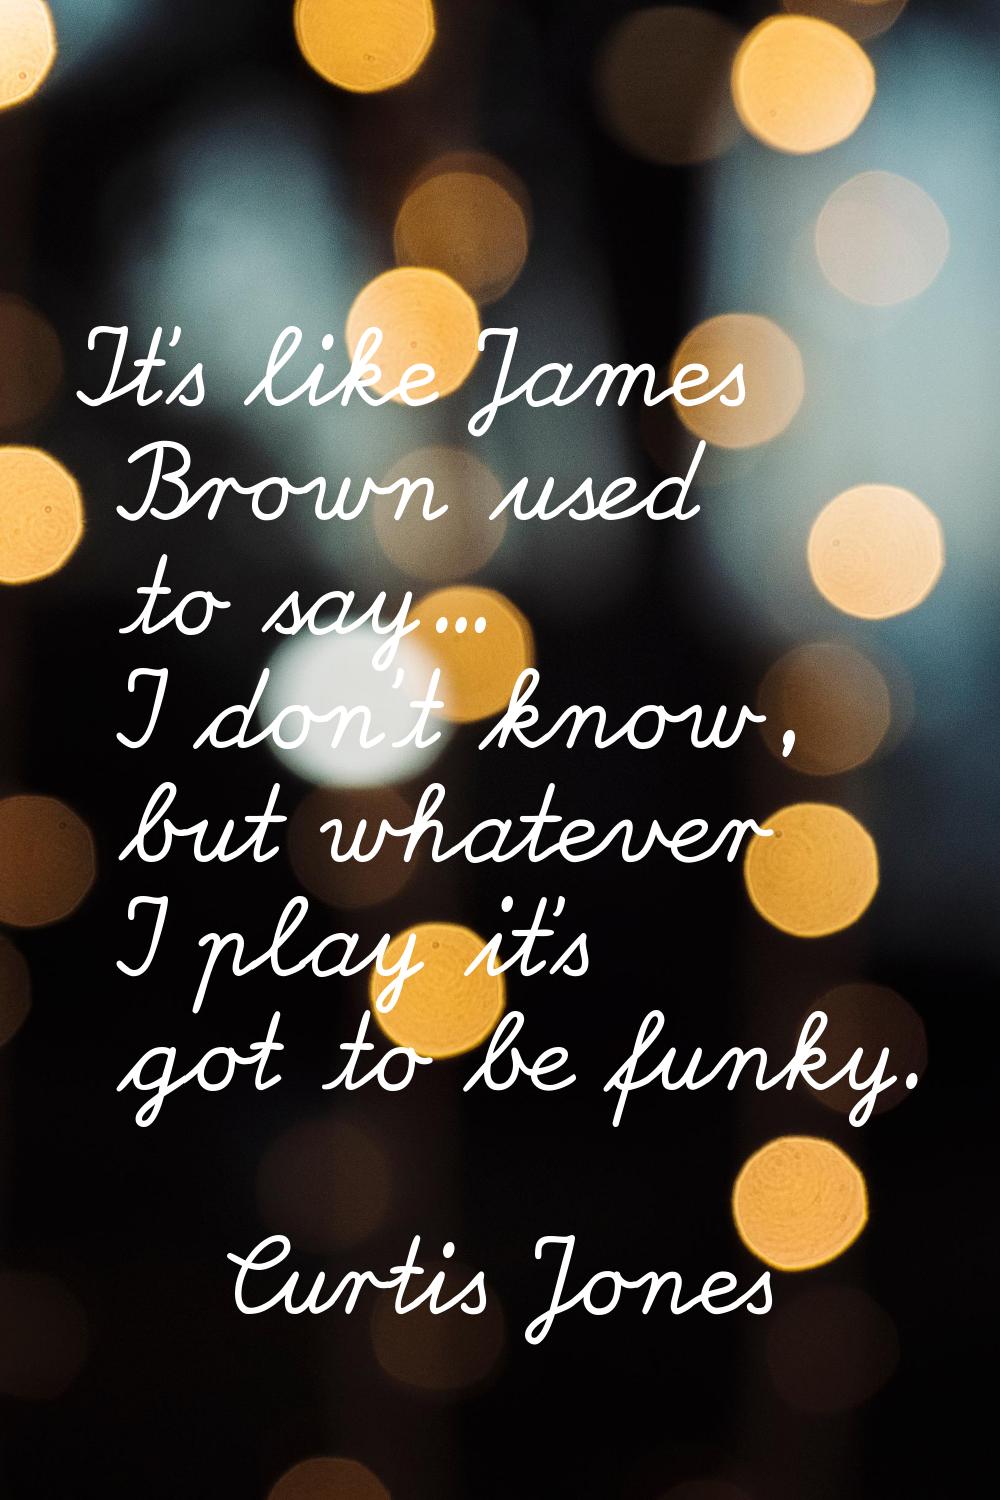 It's like James Brown used to say... I don't know, but whatever I play it's got to be funky.